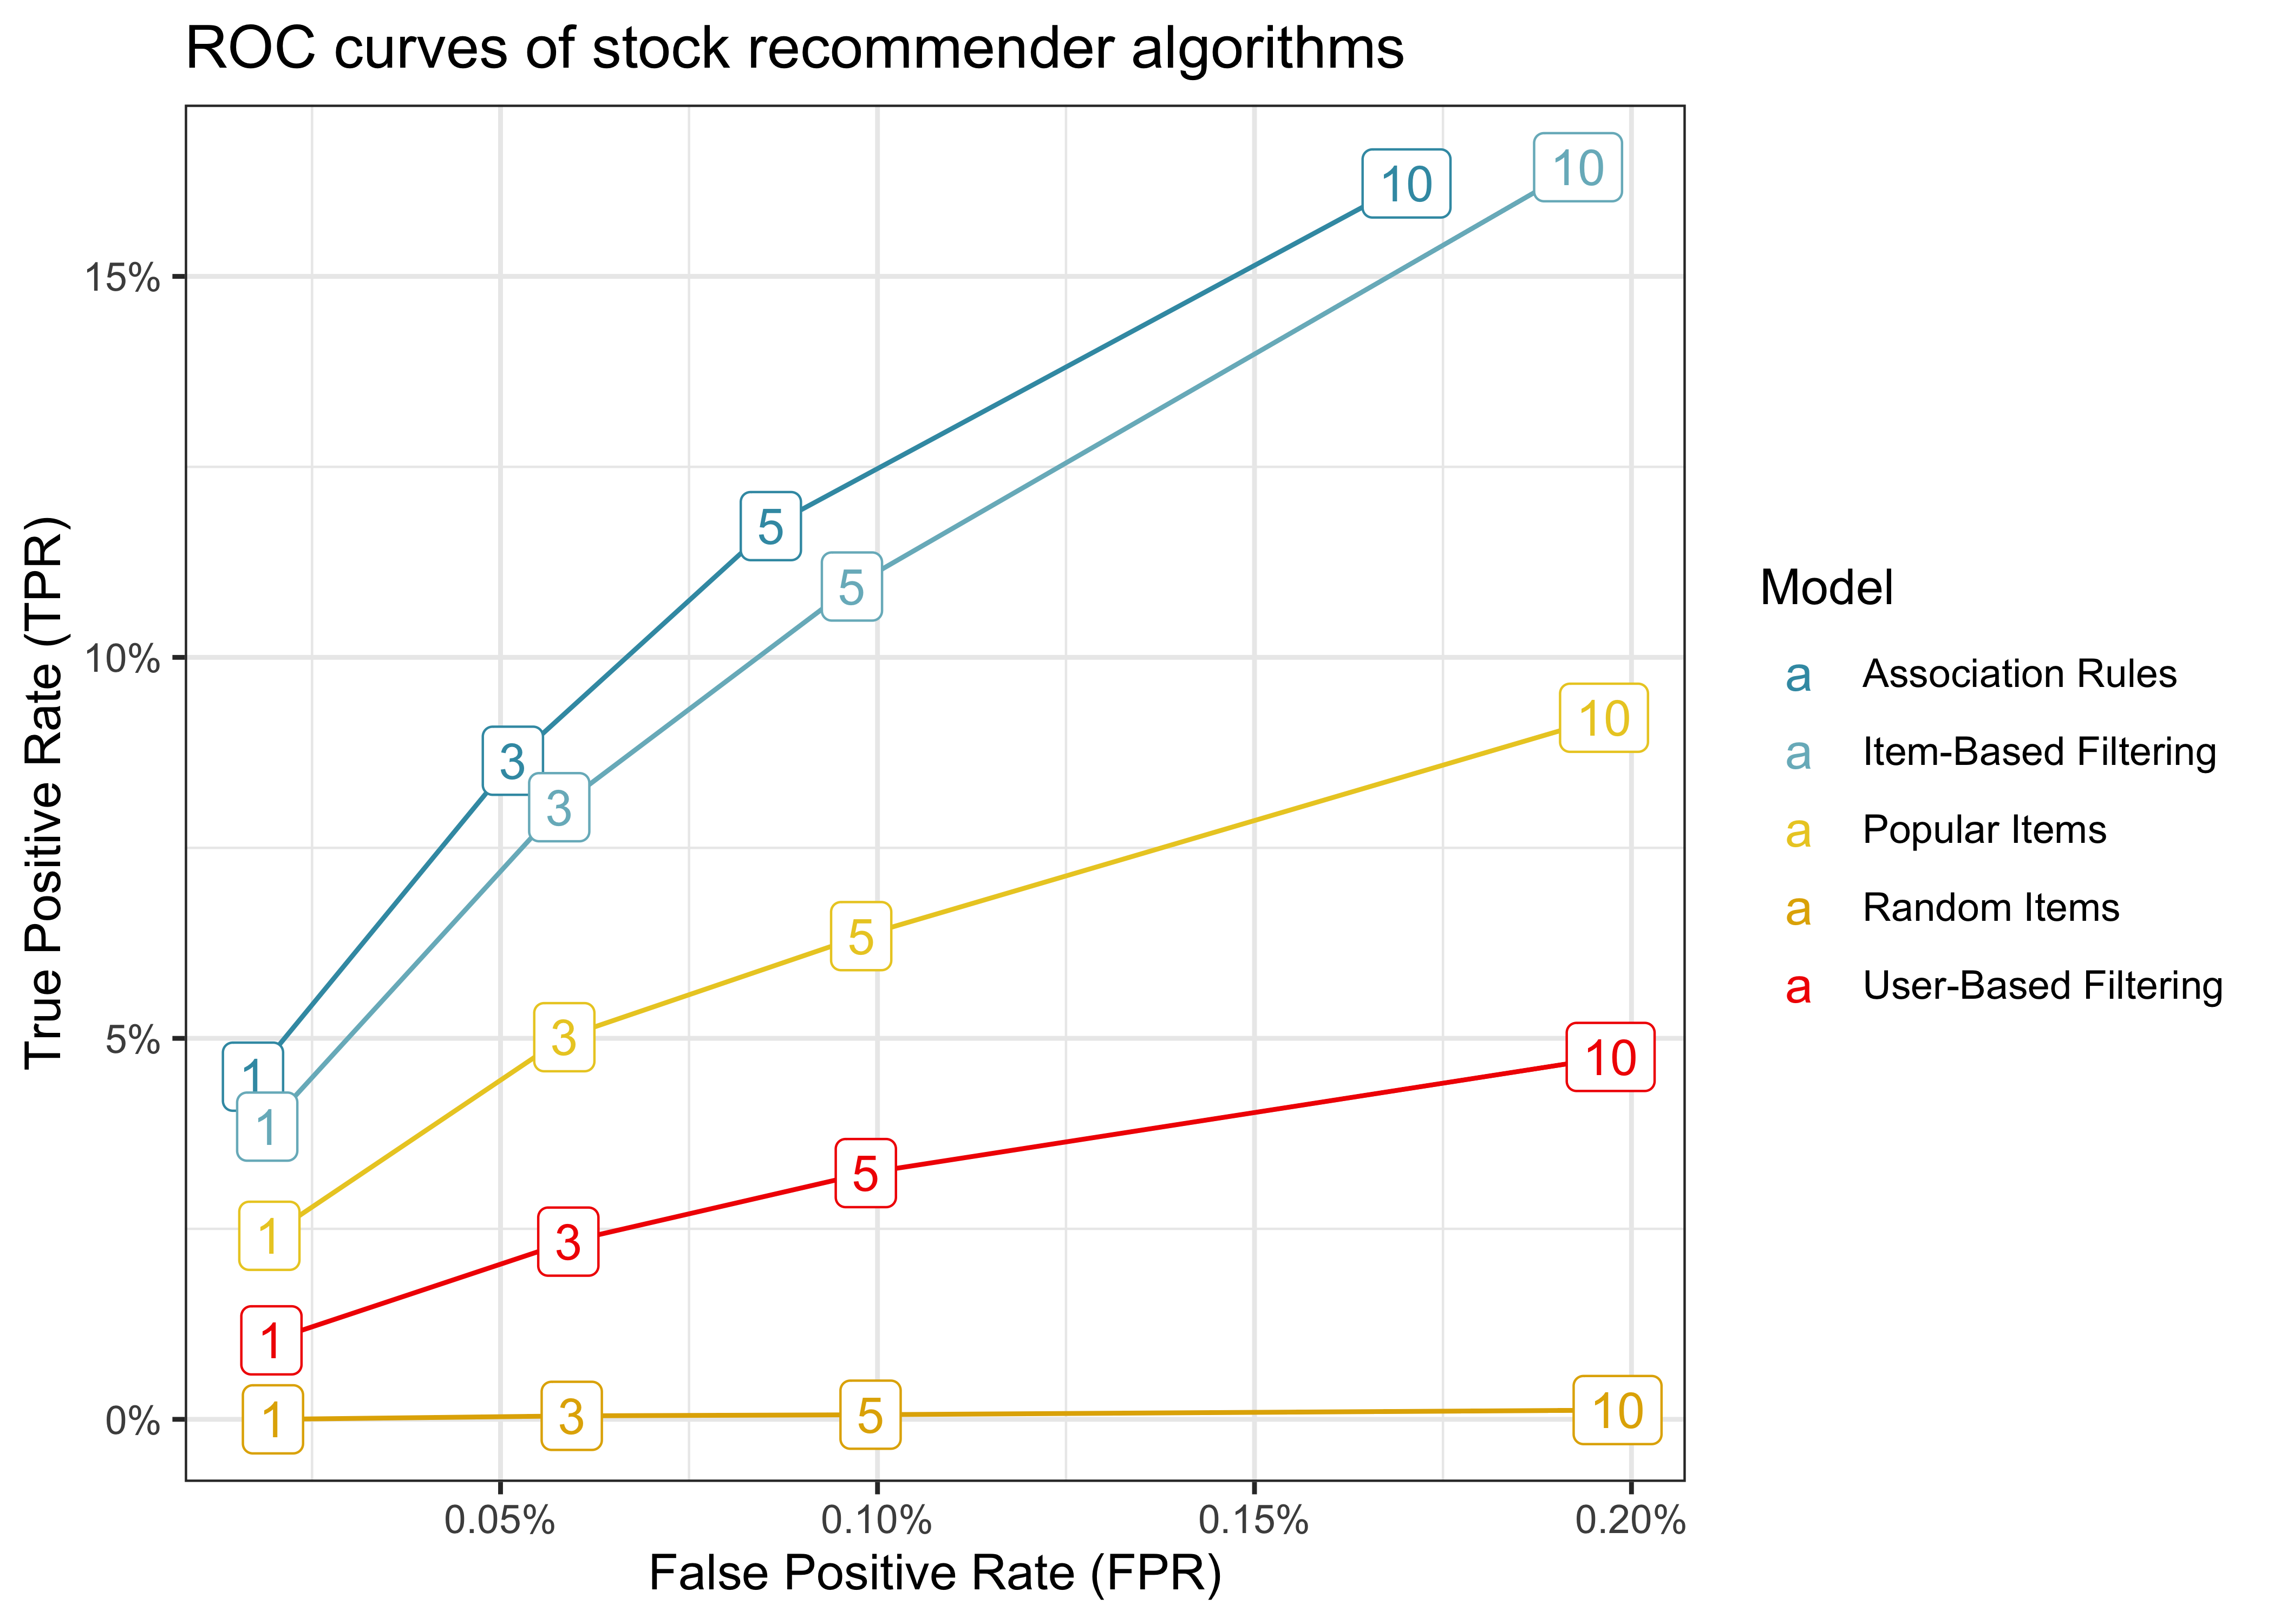 Title: ROC curves of stock recommender algorithms. The figure shows that the association rules mining algorithm achieves the highest true positive rate for any false positive rate.